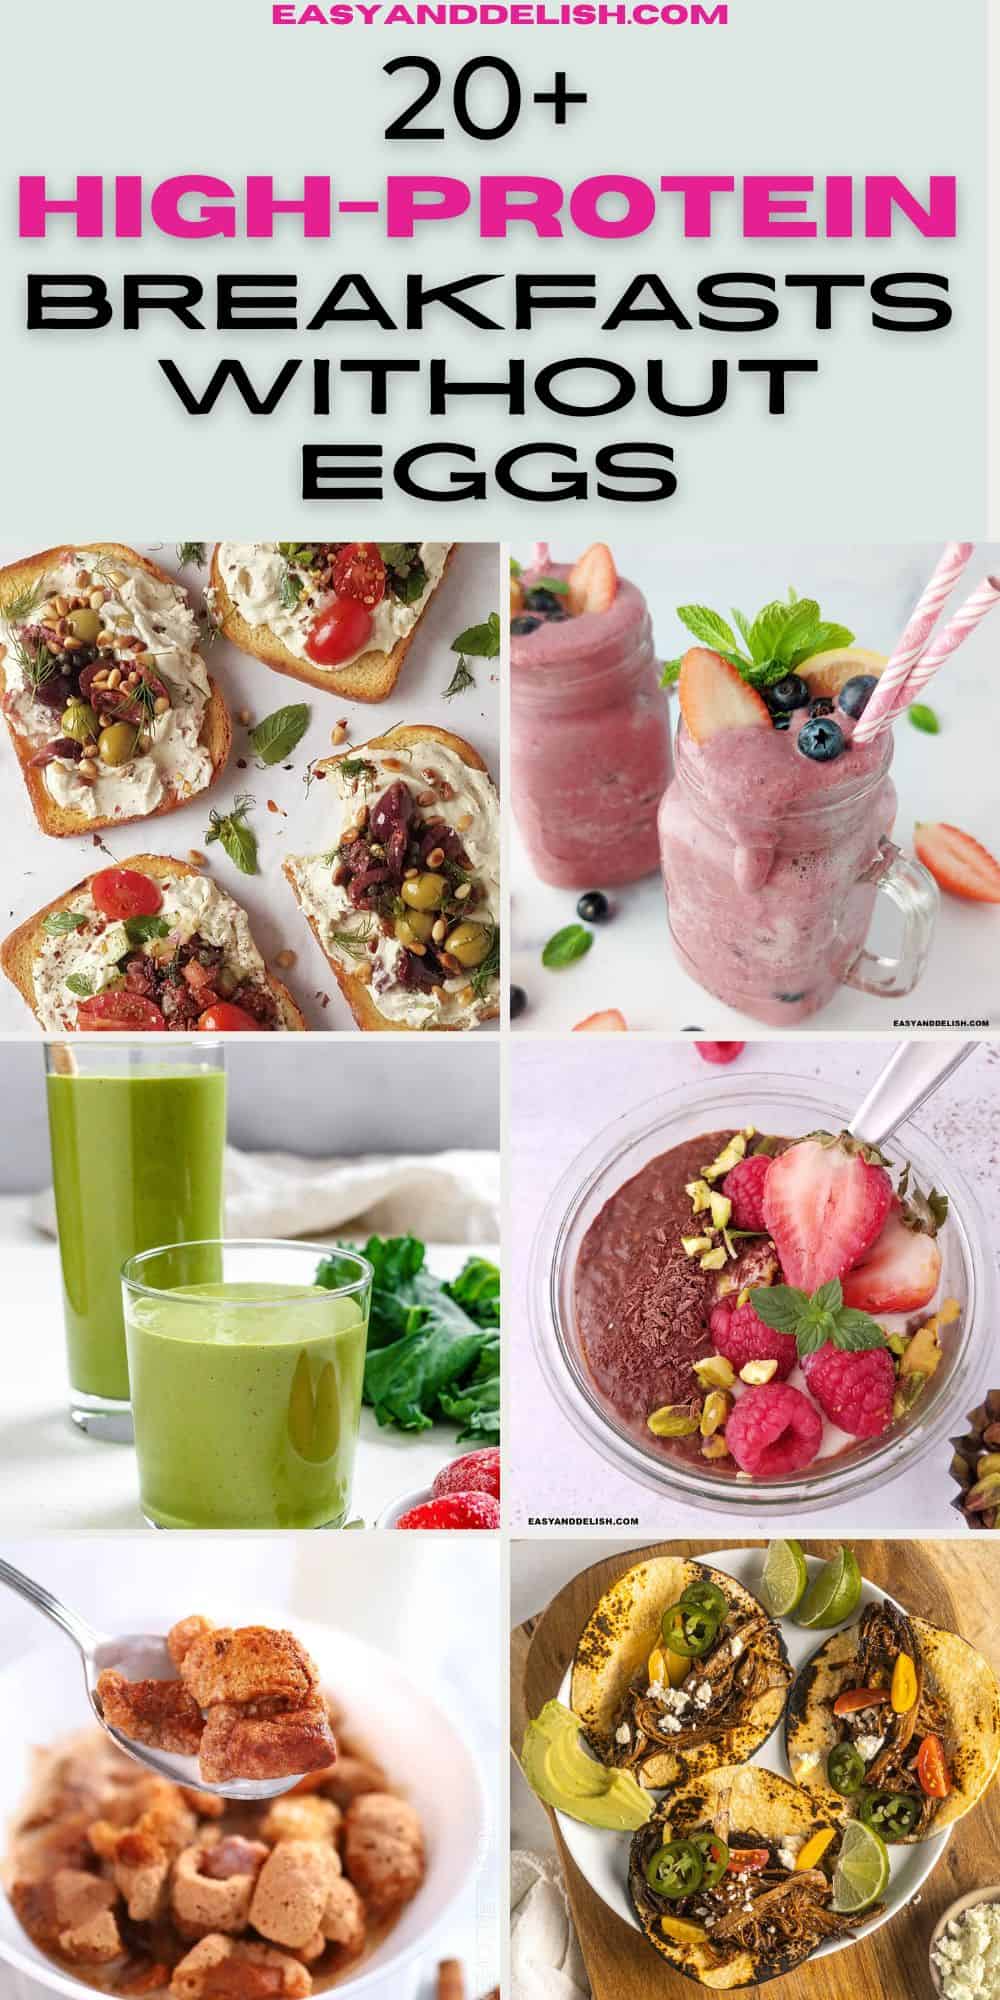 Image collage showing 6 out of 22 high protein breakfast recipes without eggs,